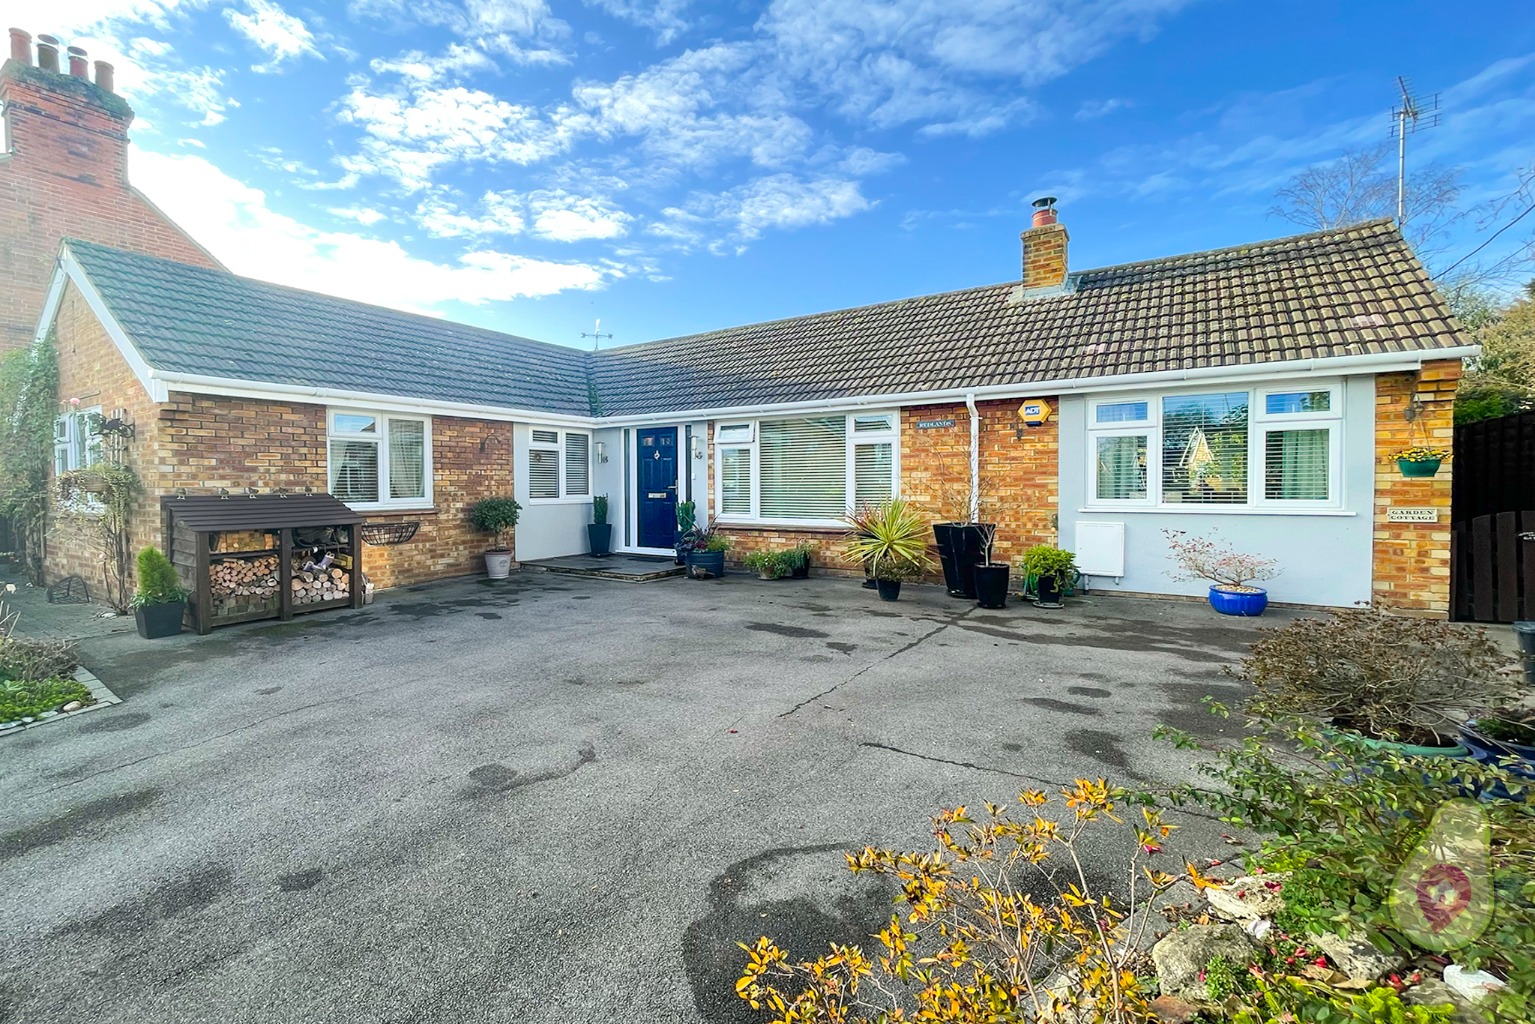 4 bed detached bungalow for sale in Beehive Road, Bracknell - Property Image 1